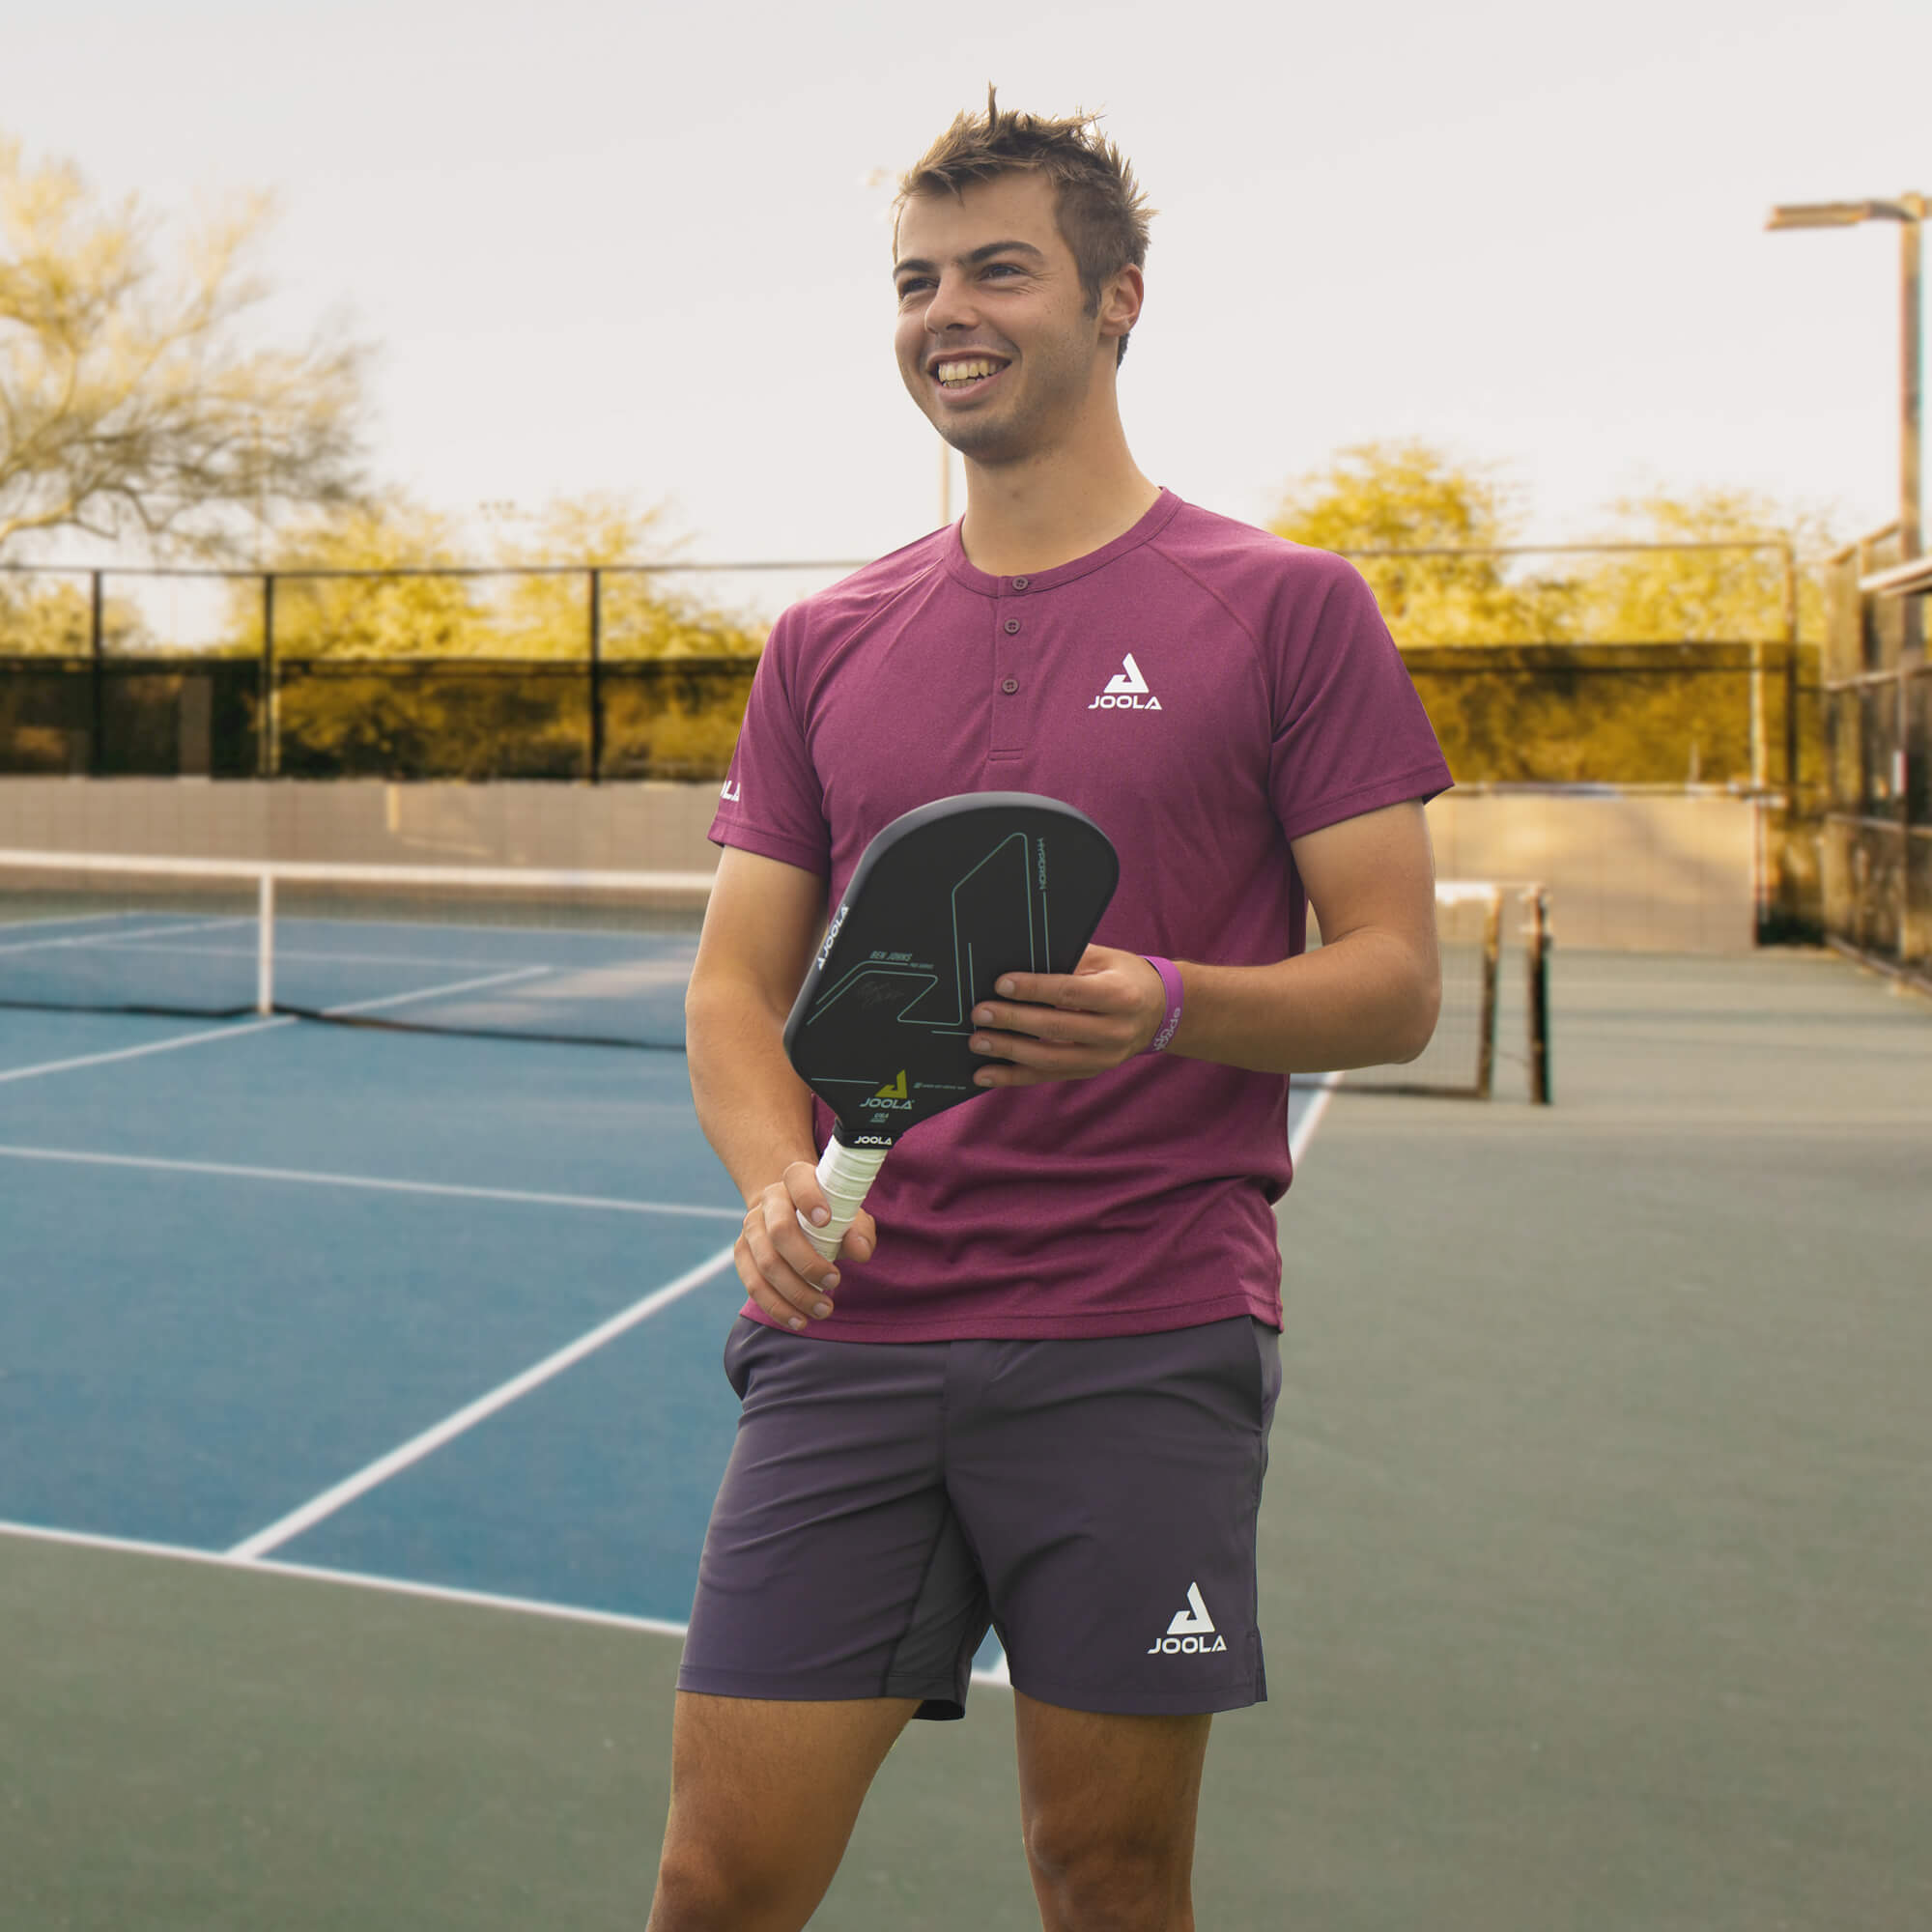 Image: Ben Johns smiling on the pickleball court dressed in the JOOLA Ben Johns Propel Shirt in Burgundy and JOOLA Ben Johns Fluid Shorts in Black